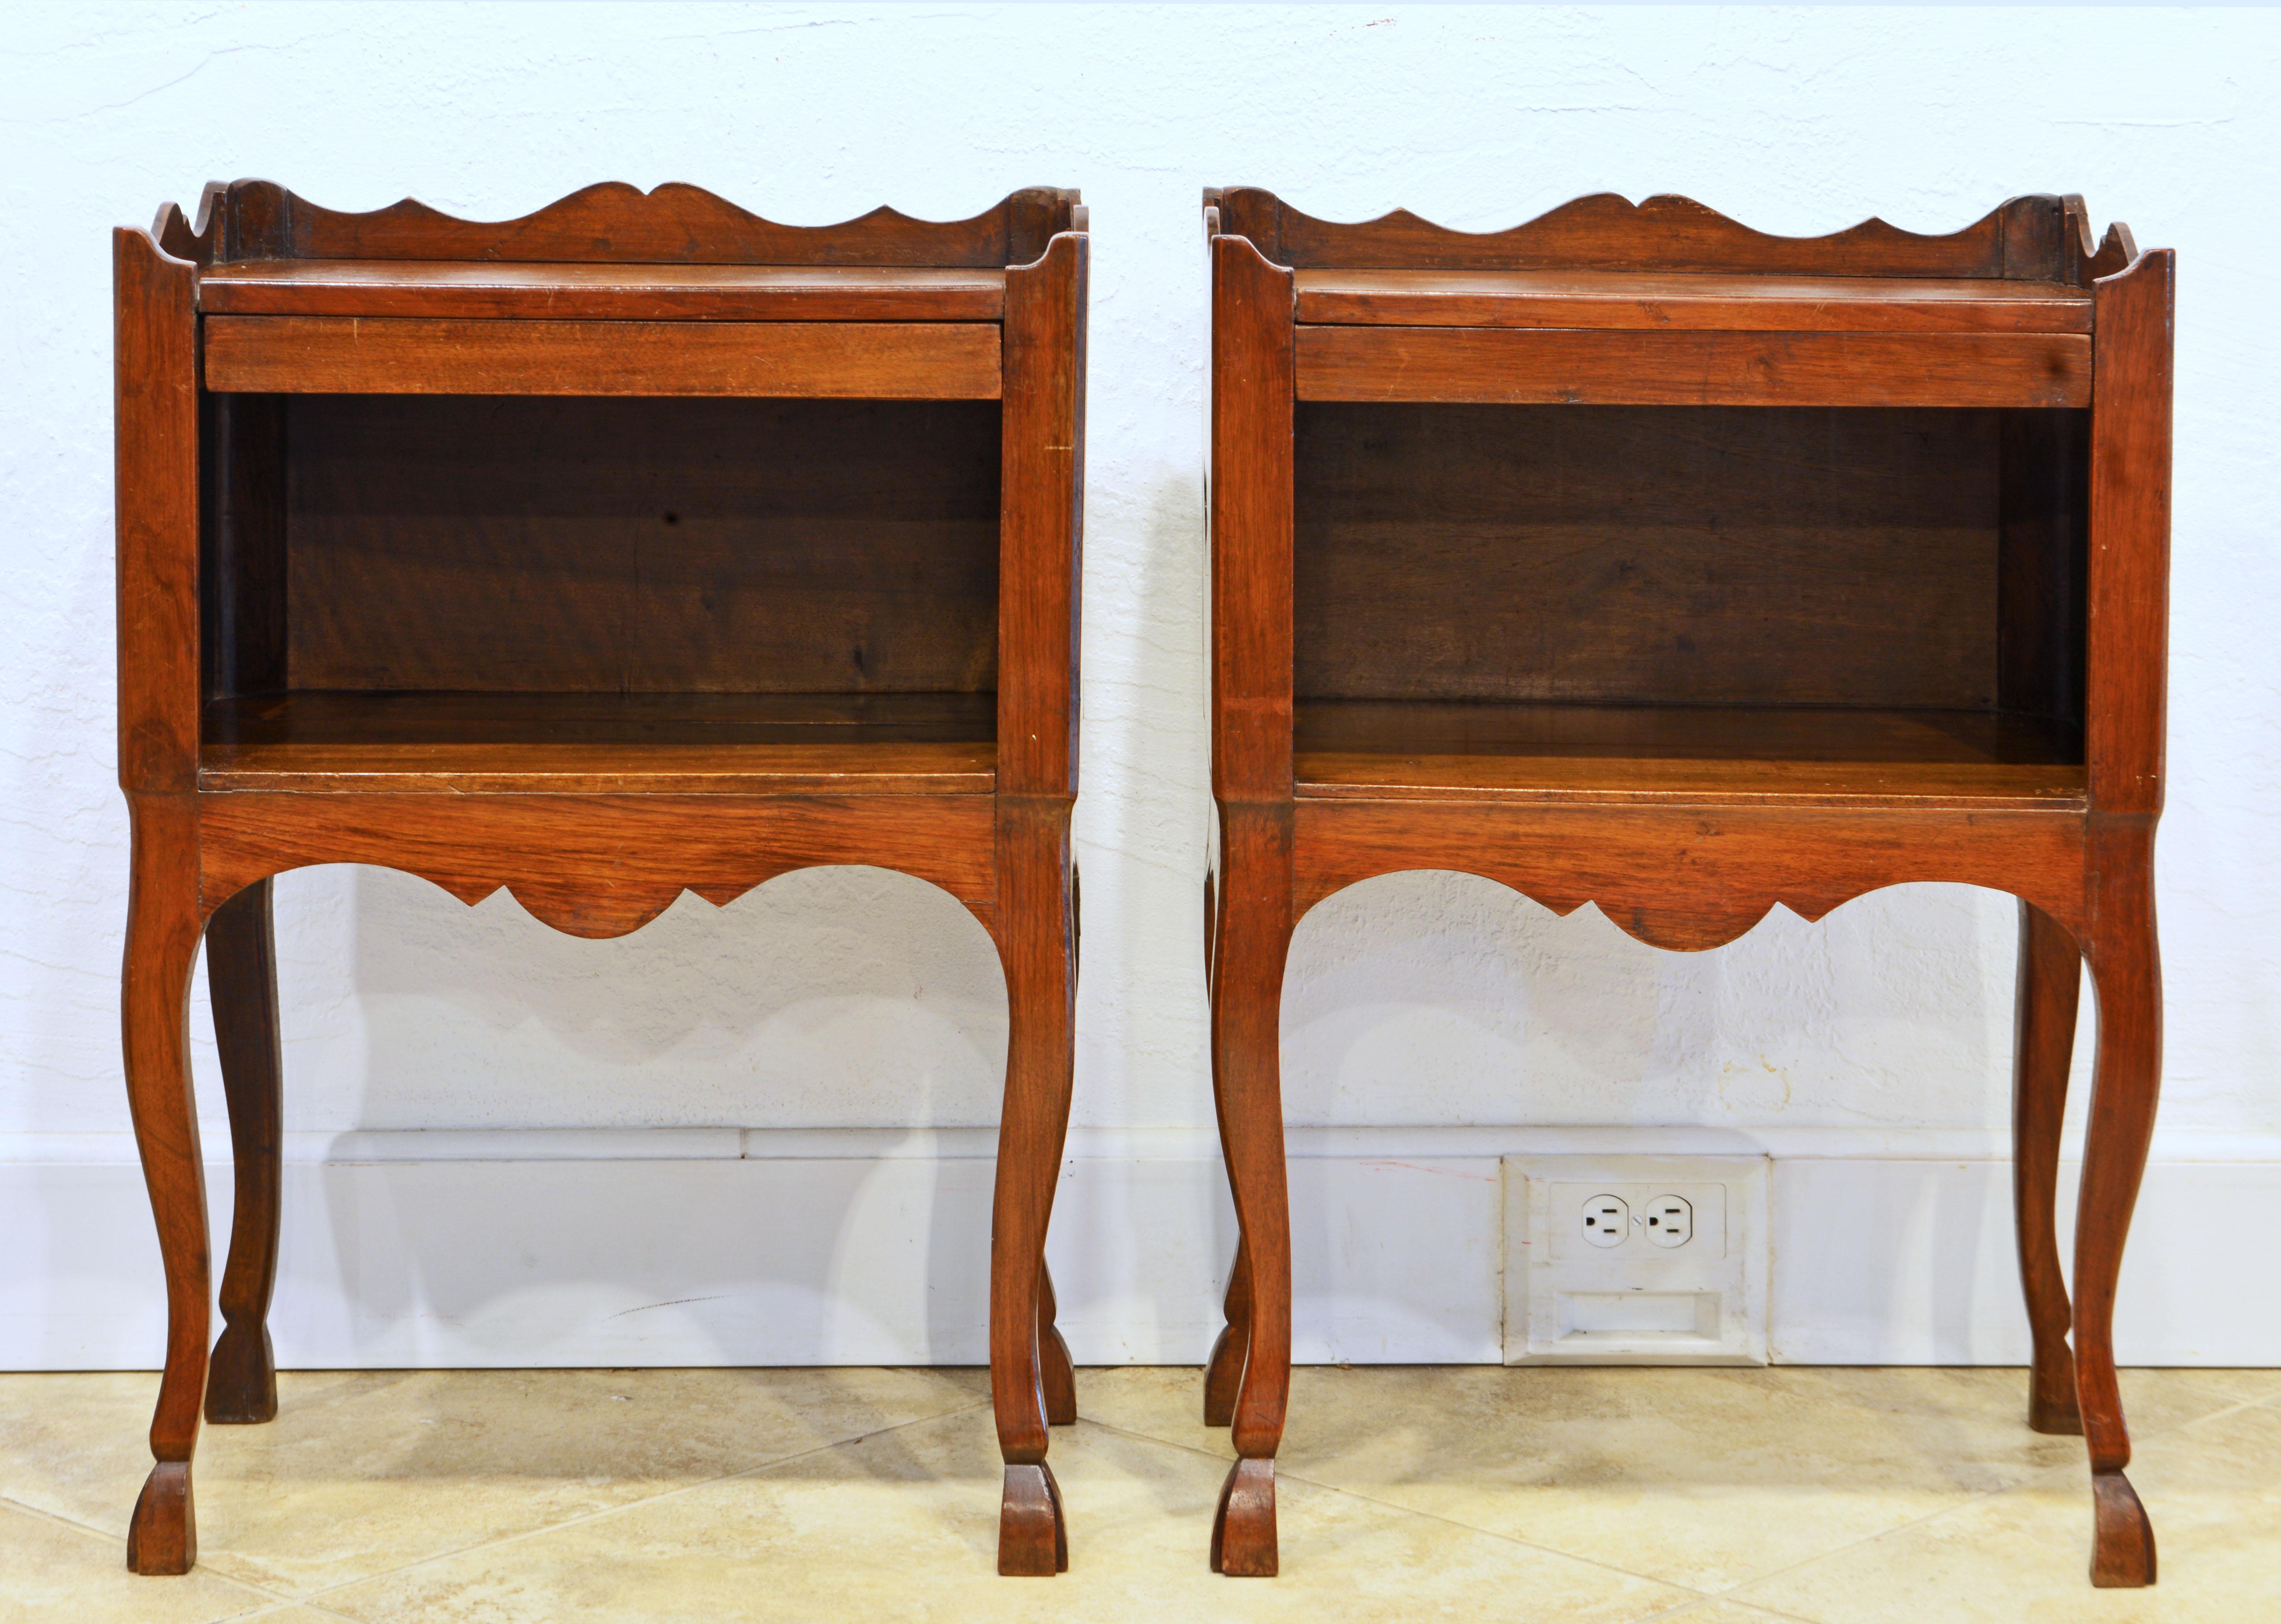 Dating to the mid 19th century this charming pair of French Provincial side tables or commodes feature beautifully carved scalloped galleries surrounding the three sides and shallow concealed drawers above open compartments lit by heart shaped